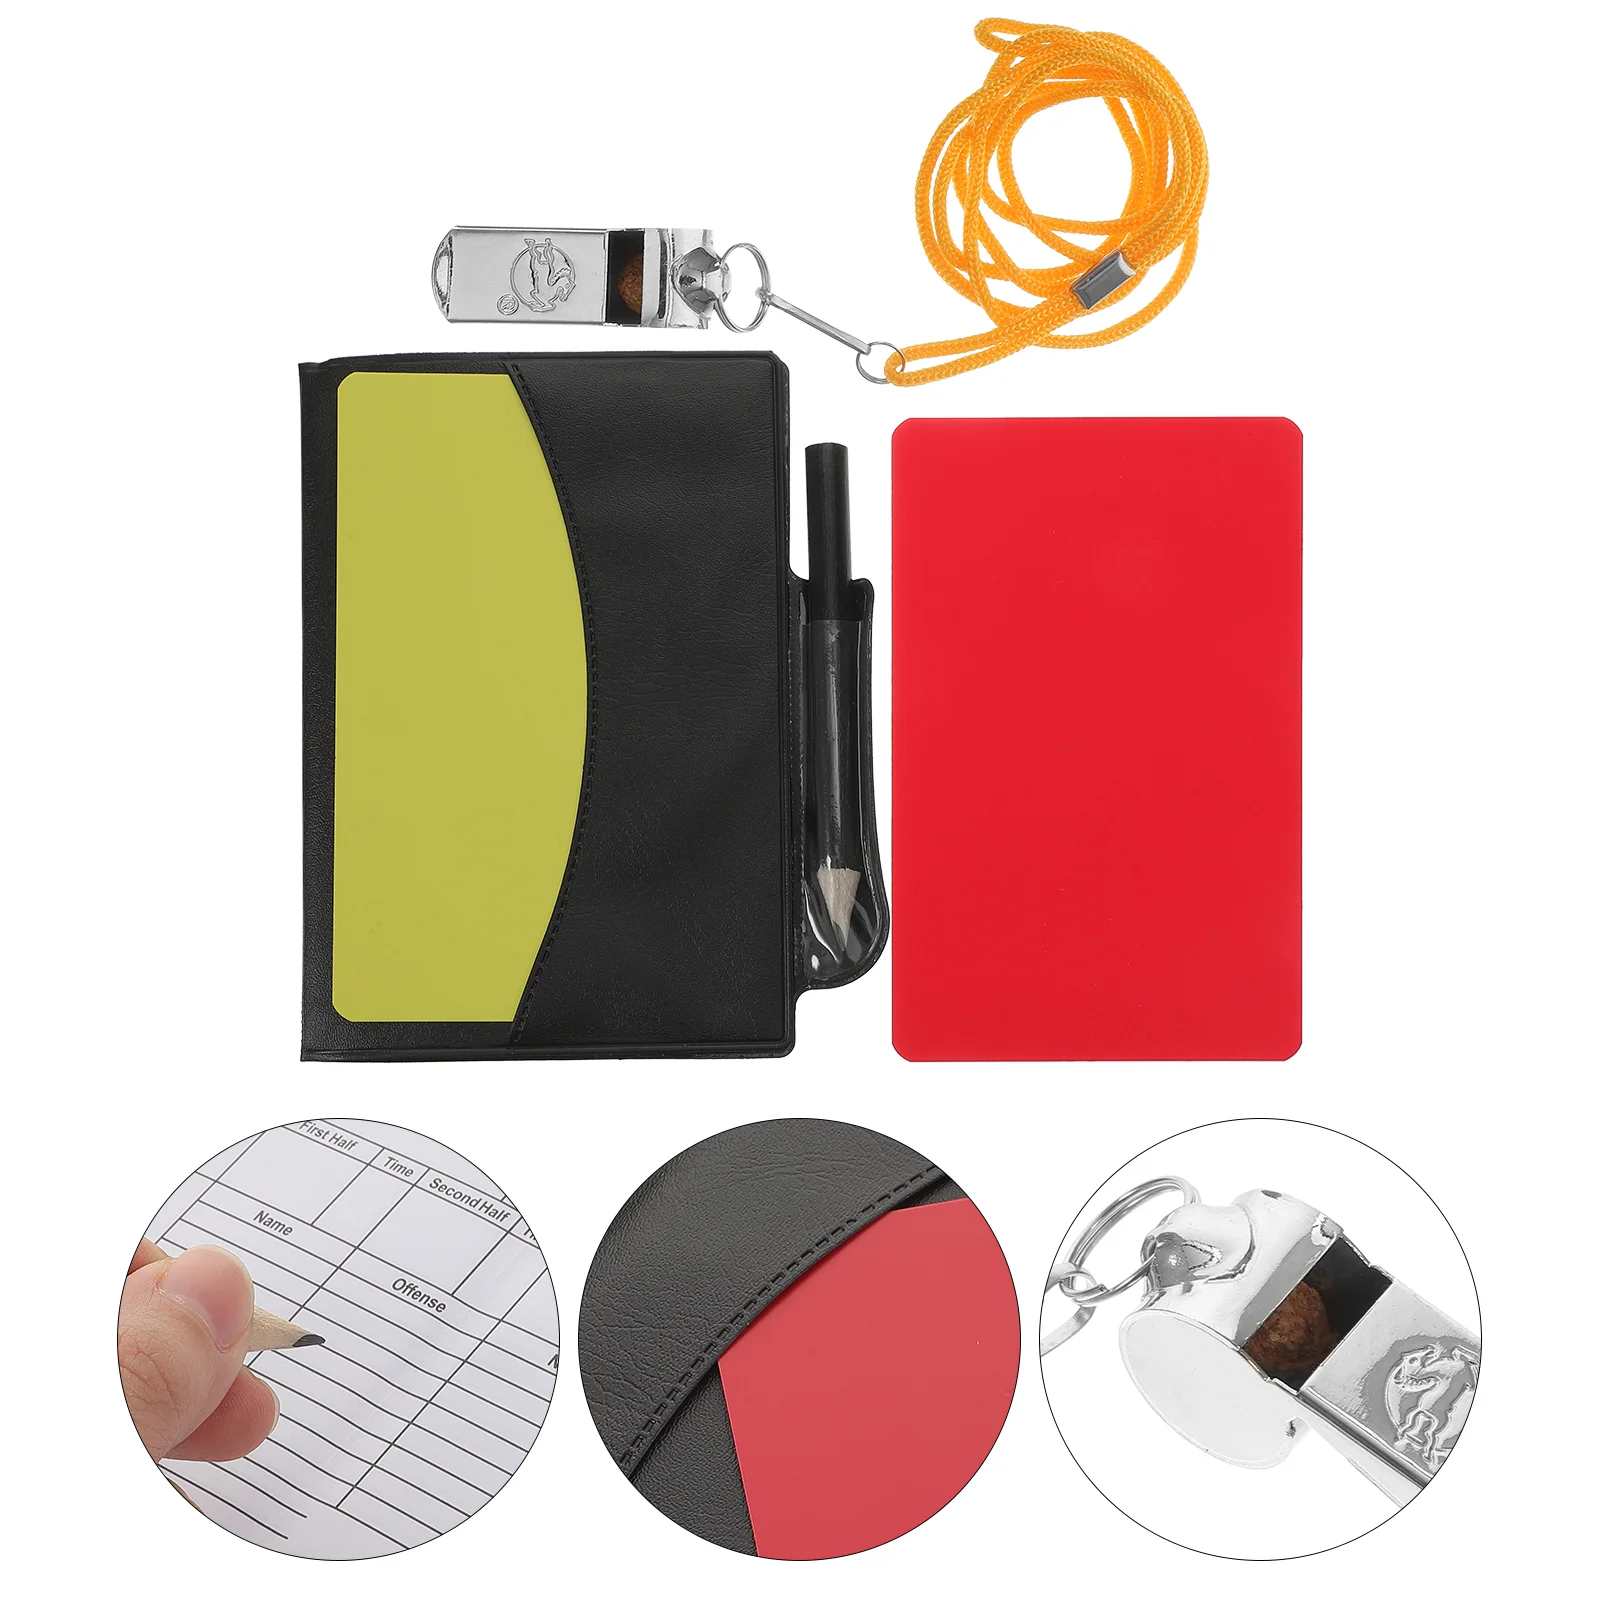 

Inoomp Metal Wallet Cards Referee Kit Red Yellow Whistle Score Pads Pencils Football Soccer Sweat Suit